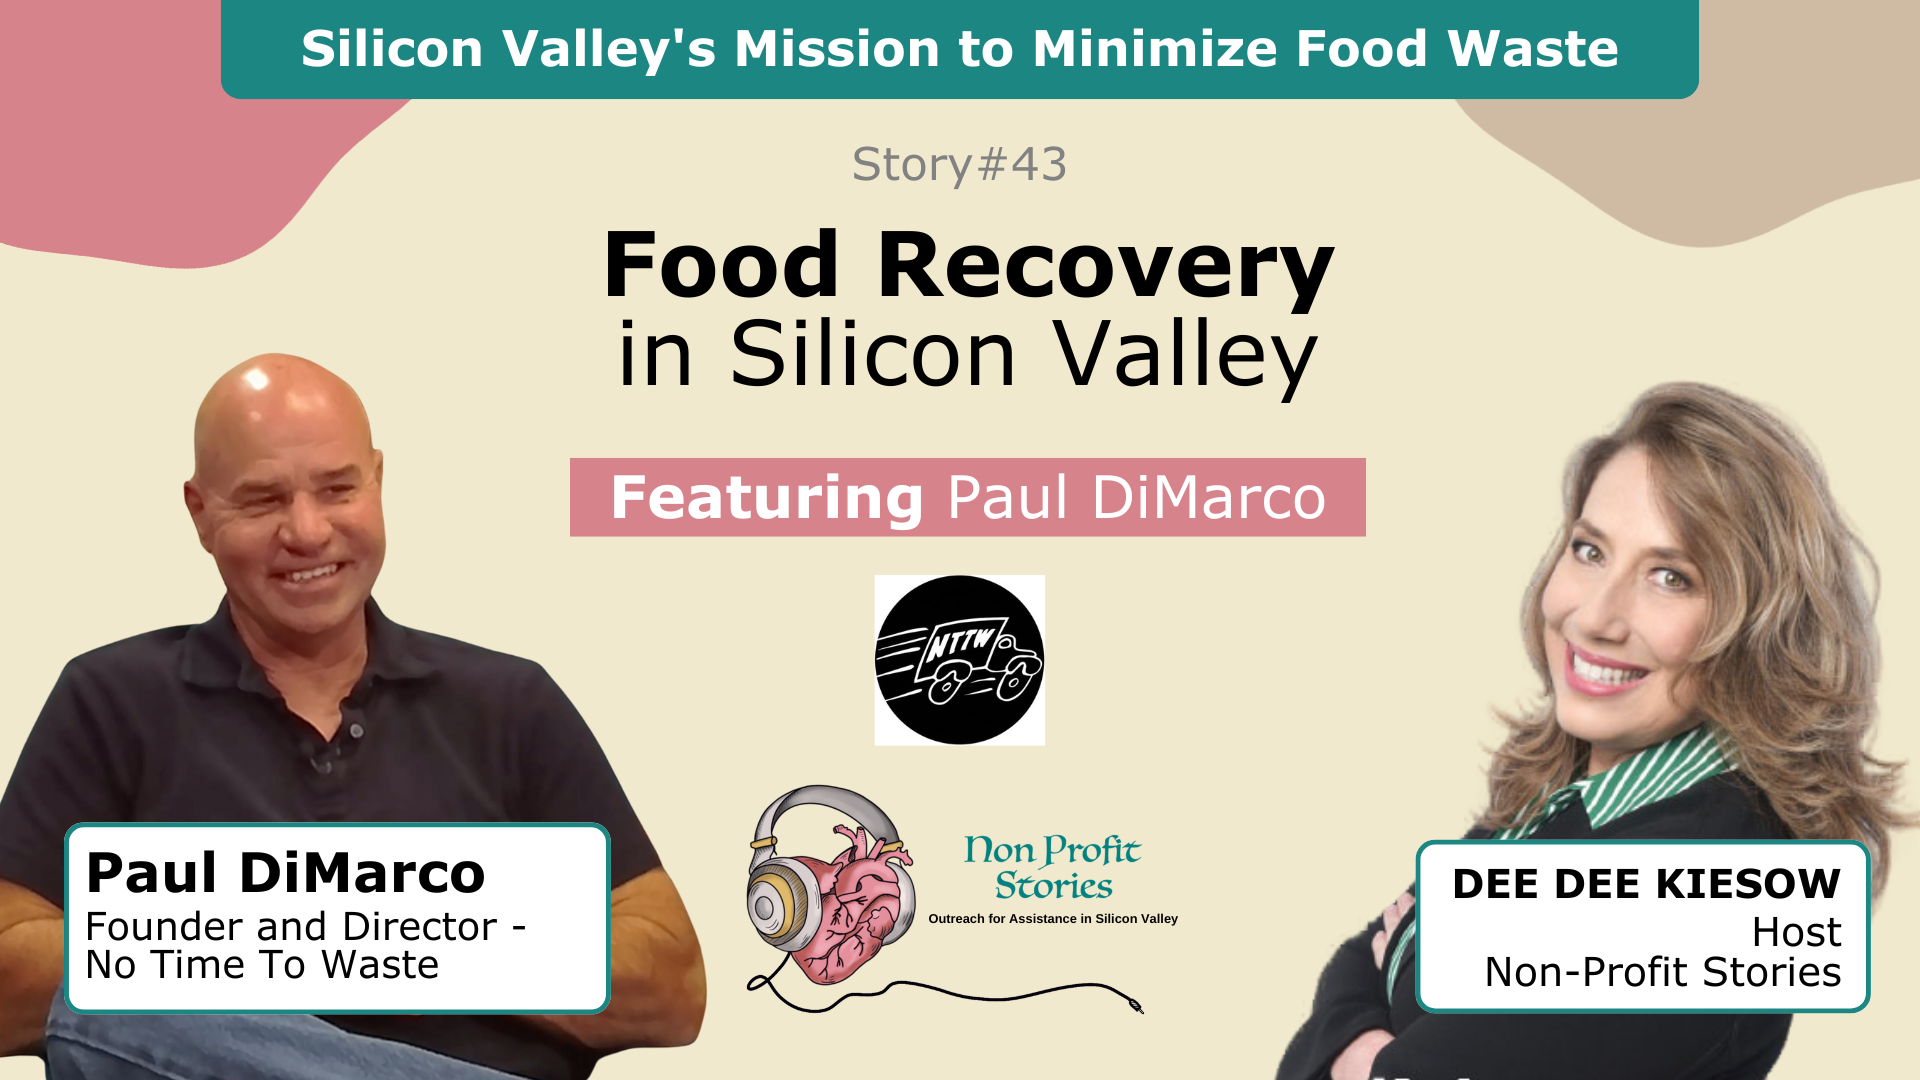 Food Recovery: Silicon Valley's Mission to Minimize Food Waste